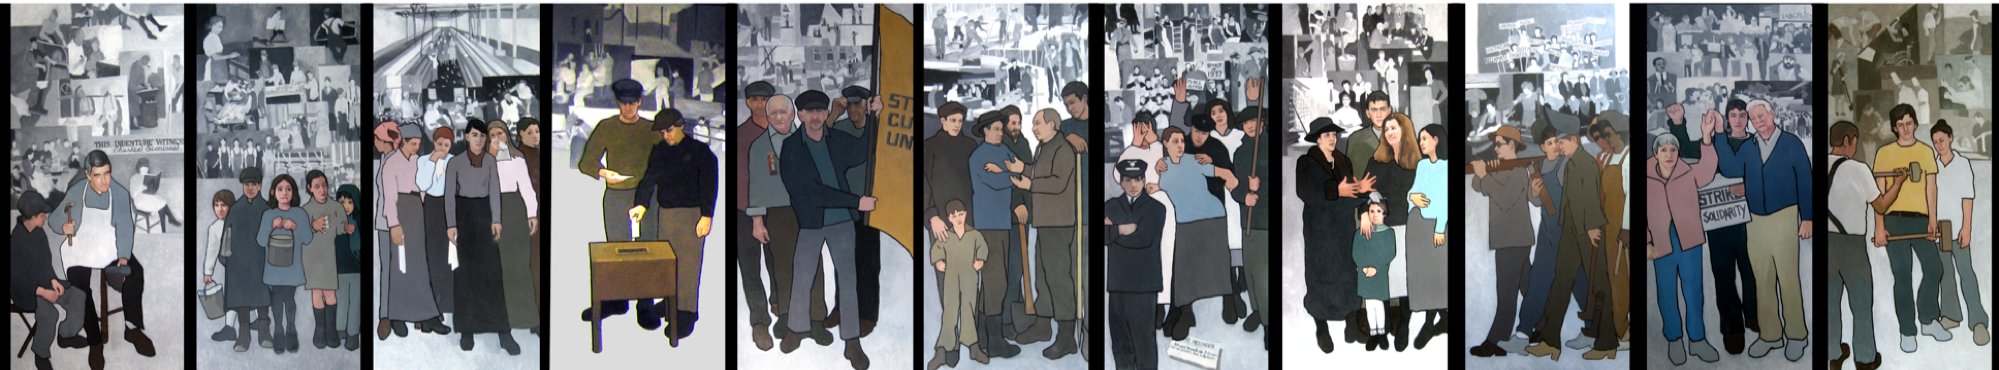 Labor Mural by Judy Taylor